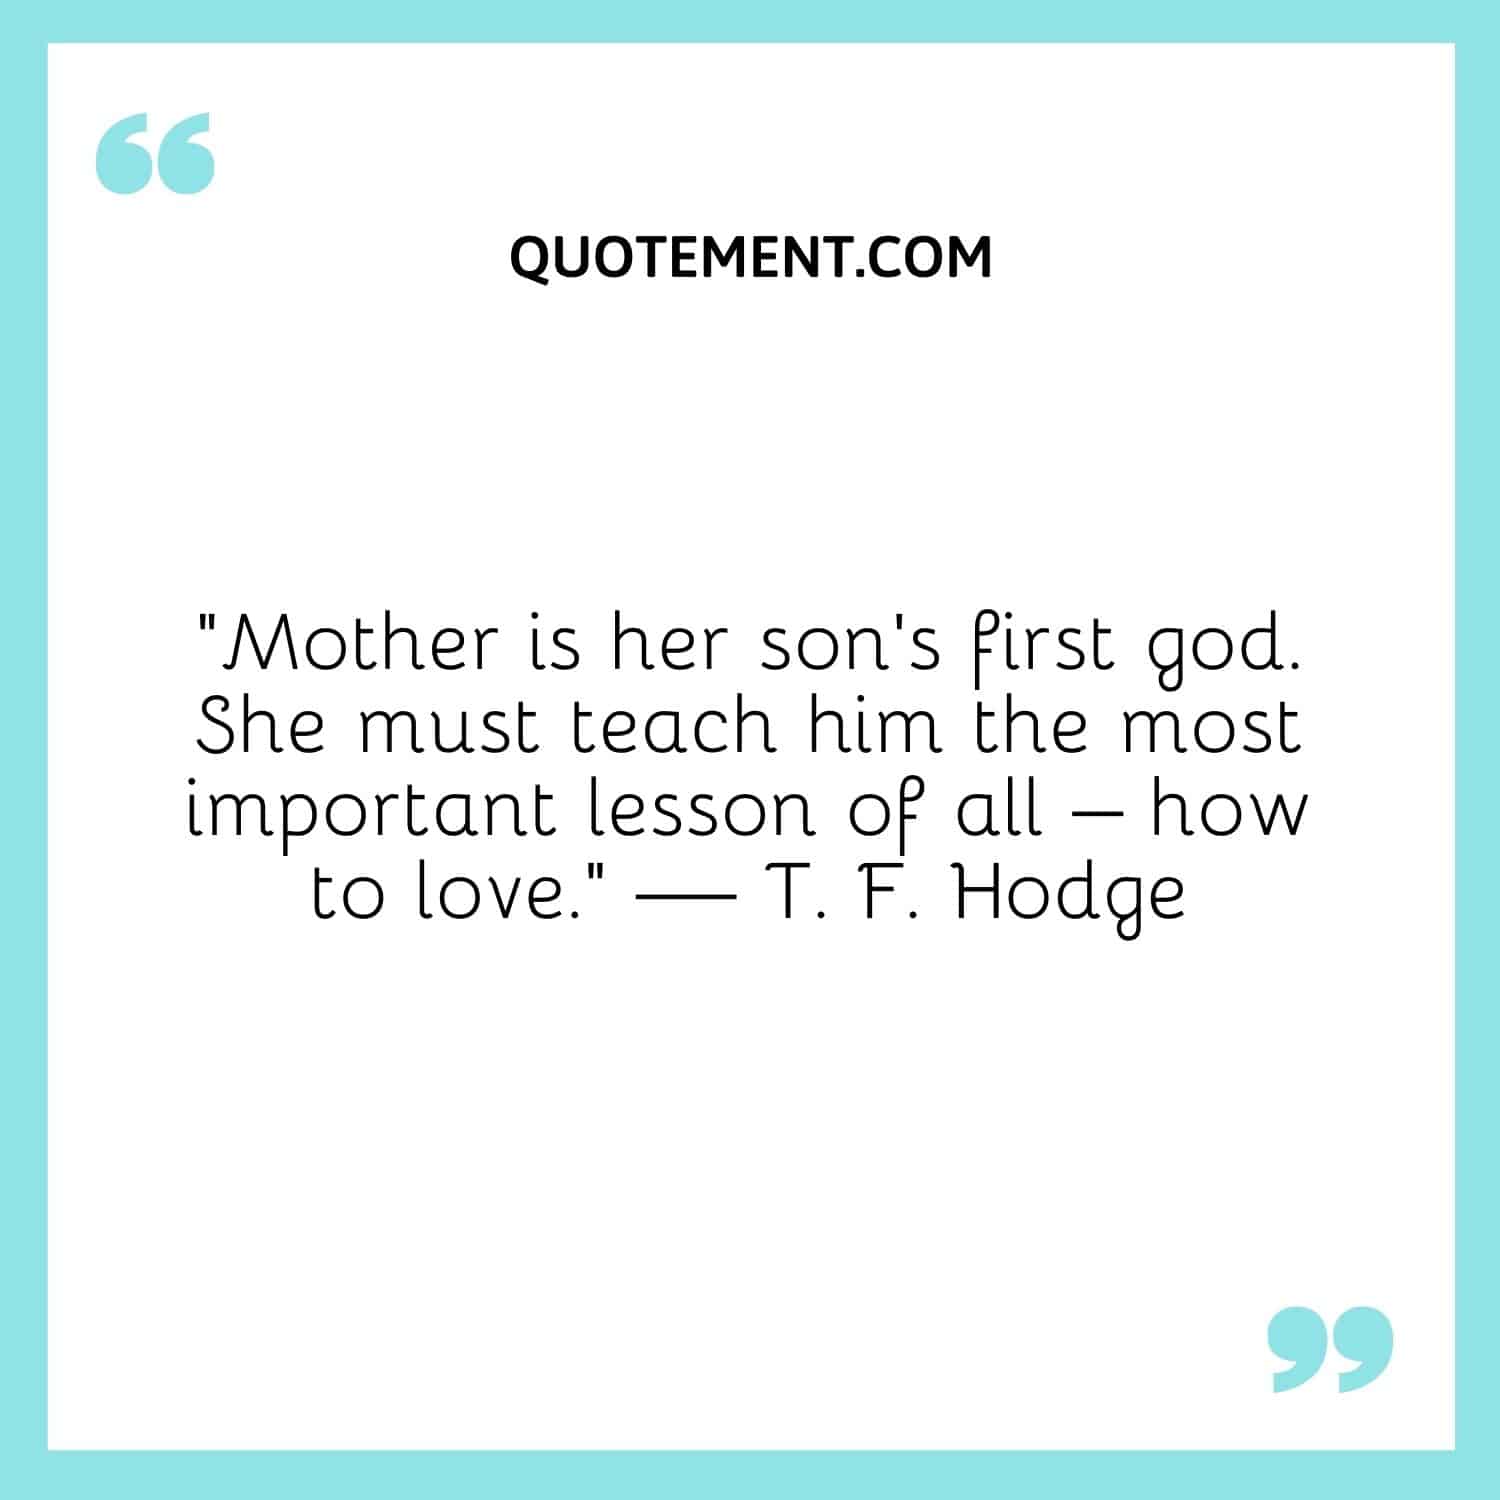 Mother is her son’s first god. She must teach him the most important lesson of all – how to love.